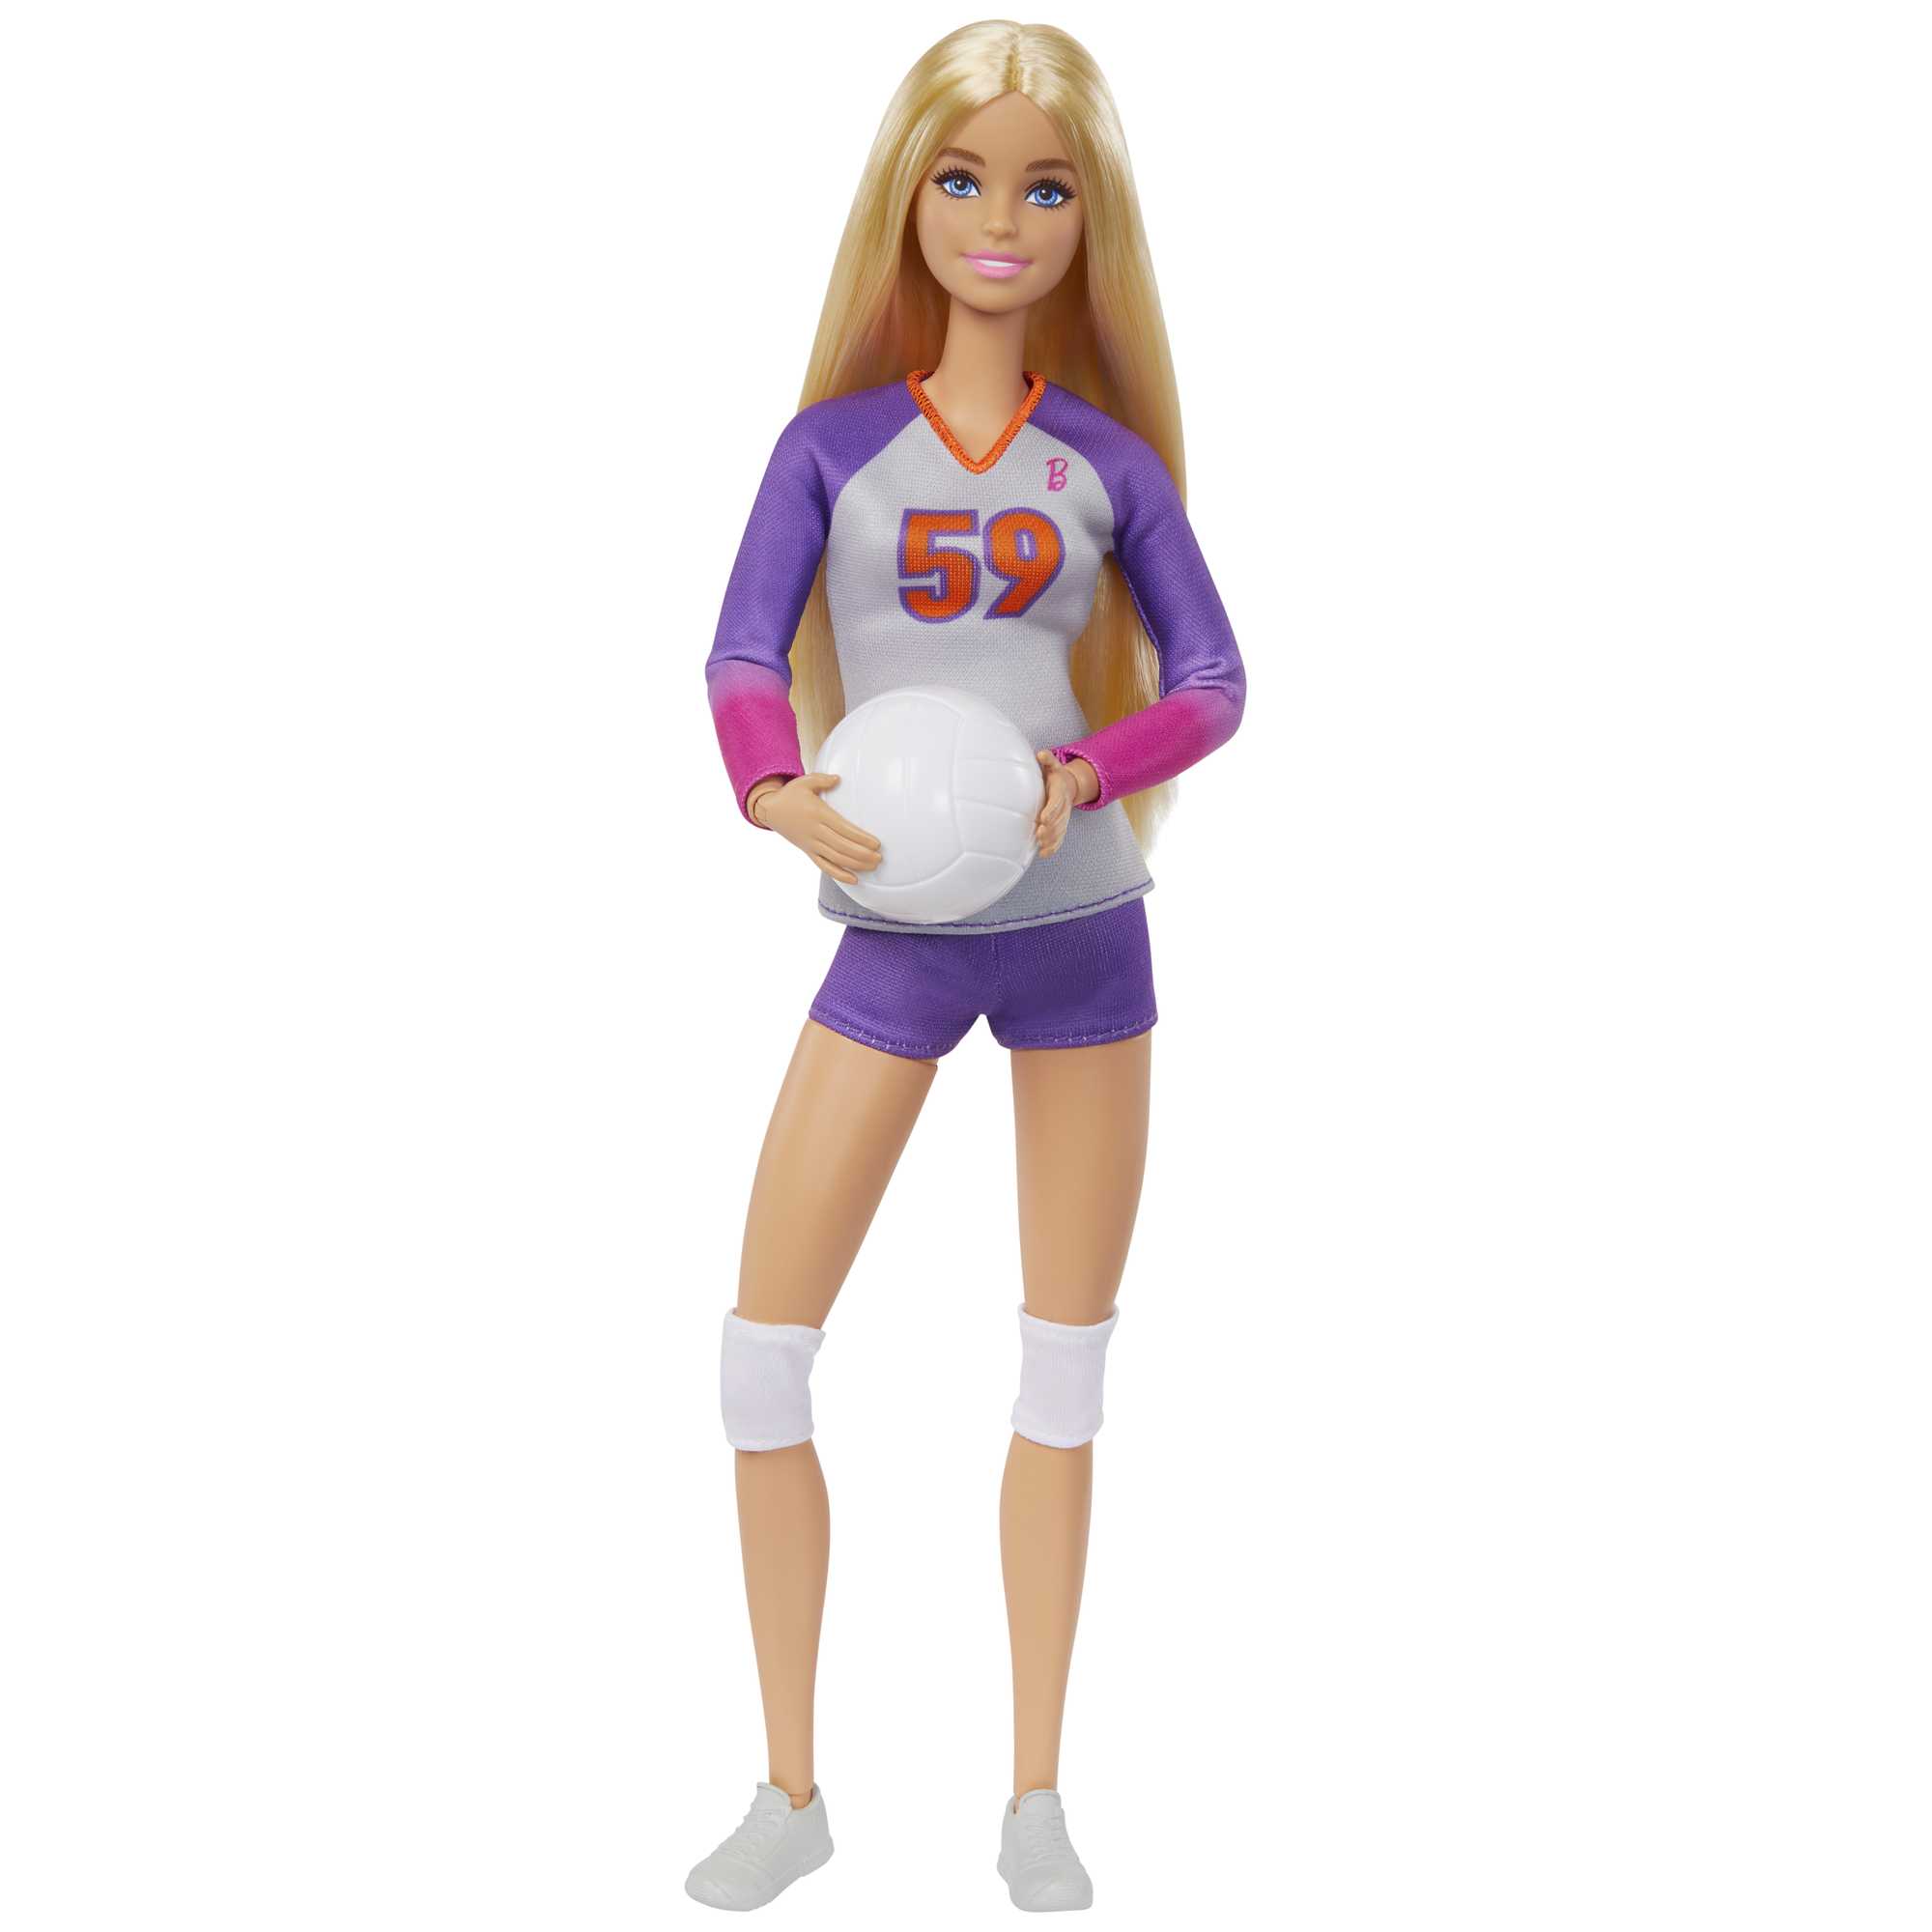 Barbie Doll & Accessories | Made to Move Volleyball Player Doll | MATTEL